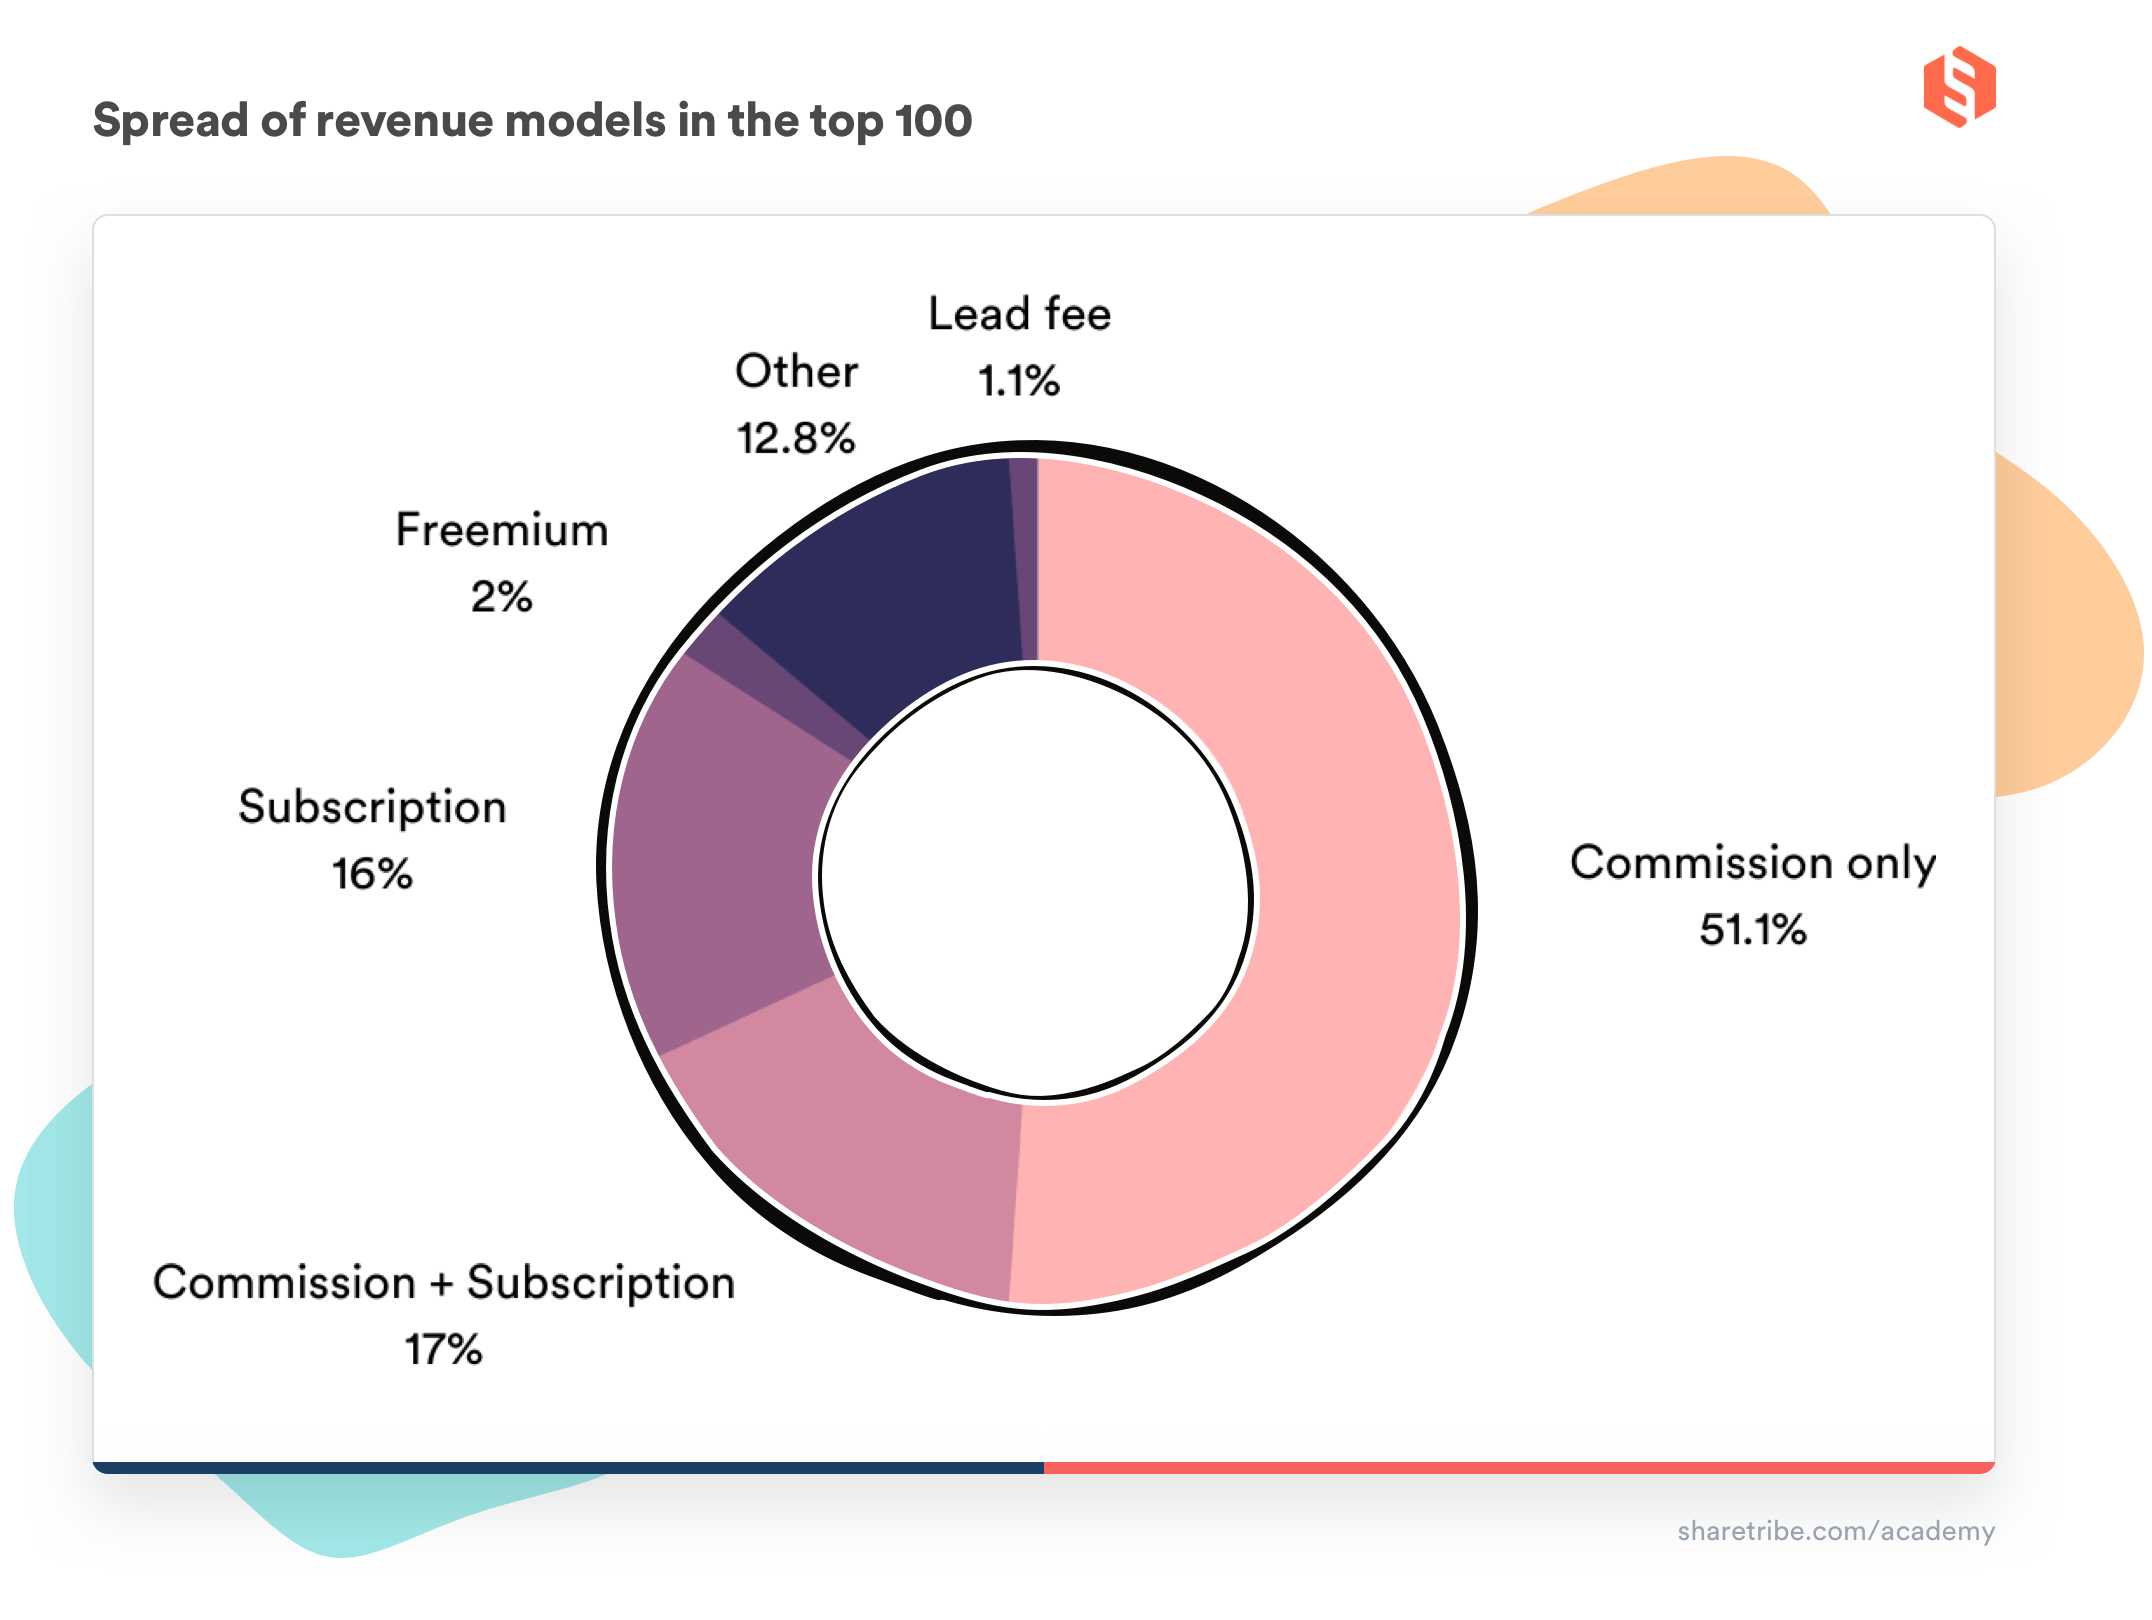 Pie chart illustrating the revenue models used by the top 100 marketplace startups in 2021: Commission only 51.5%, commission+subscipiton 17%, subscription 17´6%, freemium 2%, lead fee 1.1%, and other 12.8%.